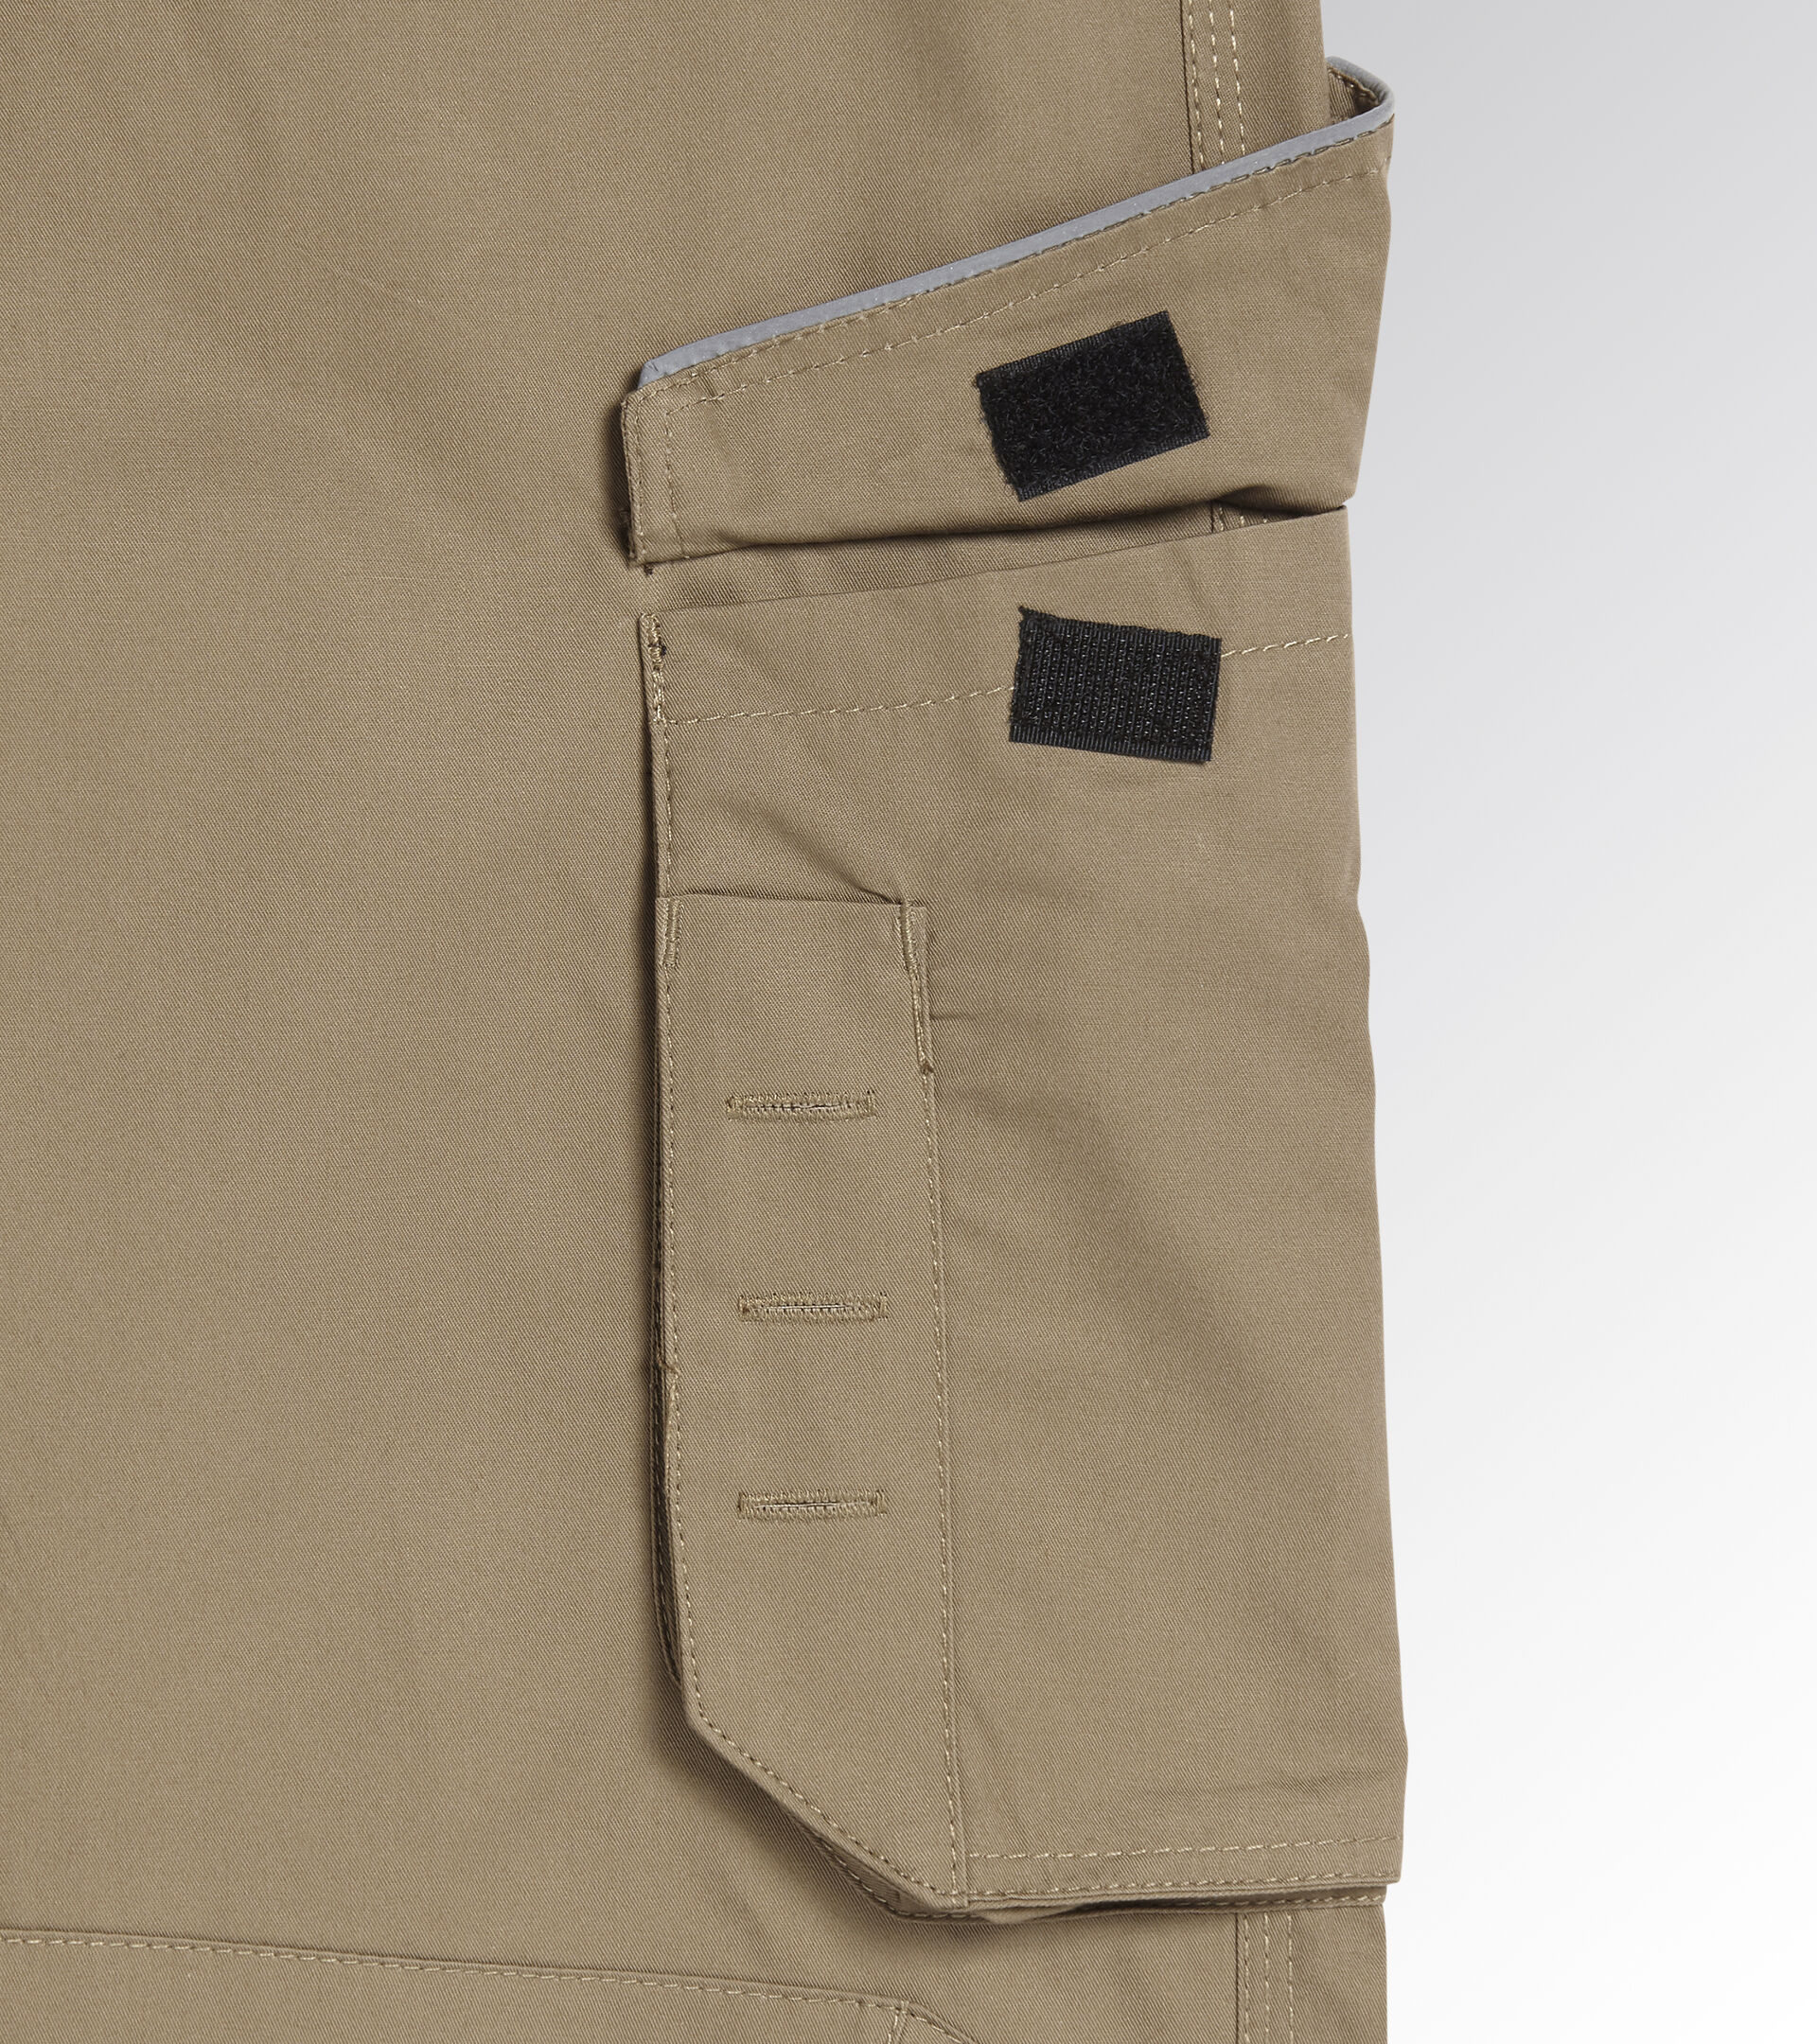 Work trousers PANT ROCK LIGHT PERF COTTON BEIGE NATURAL - Utility